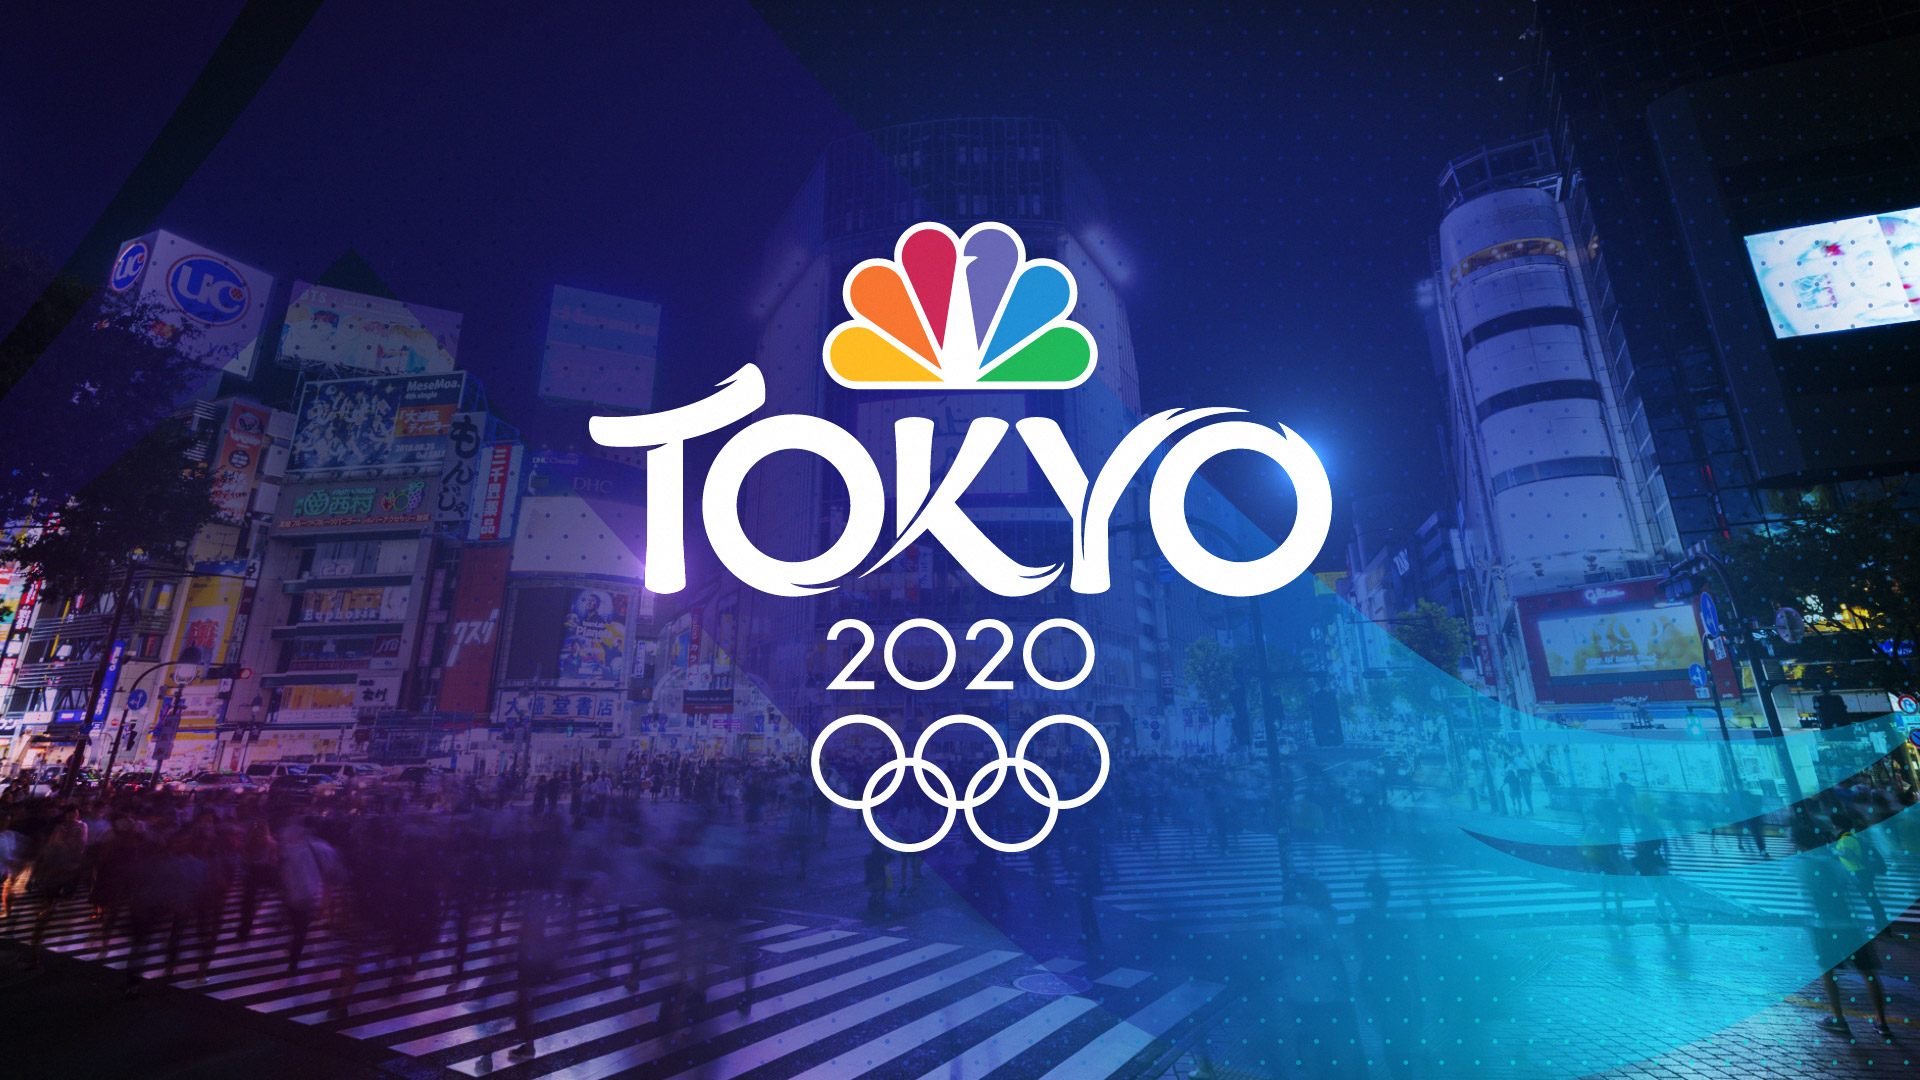 A graphic for the 2020 Summer Olympics